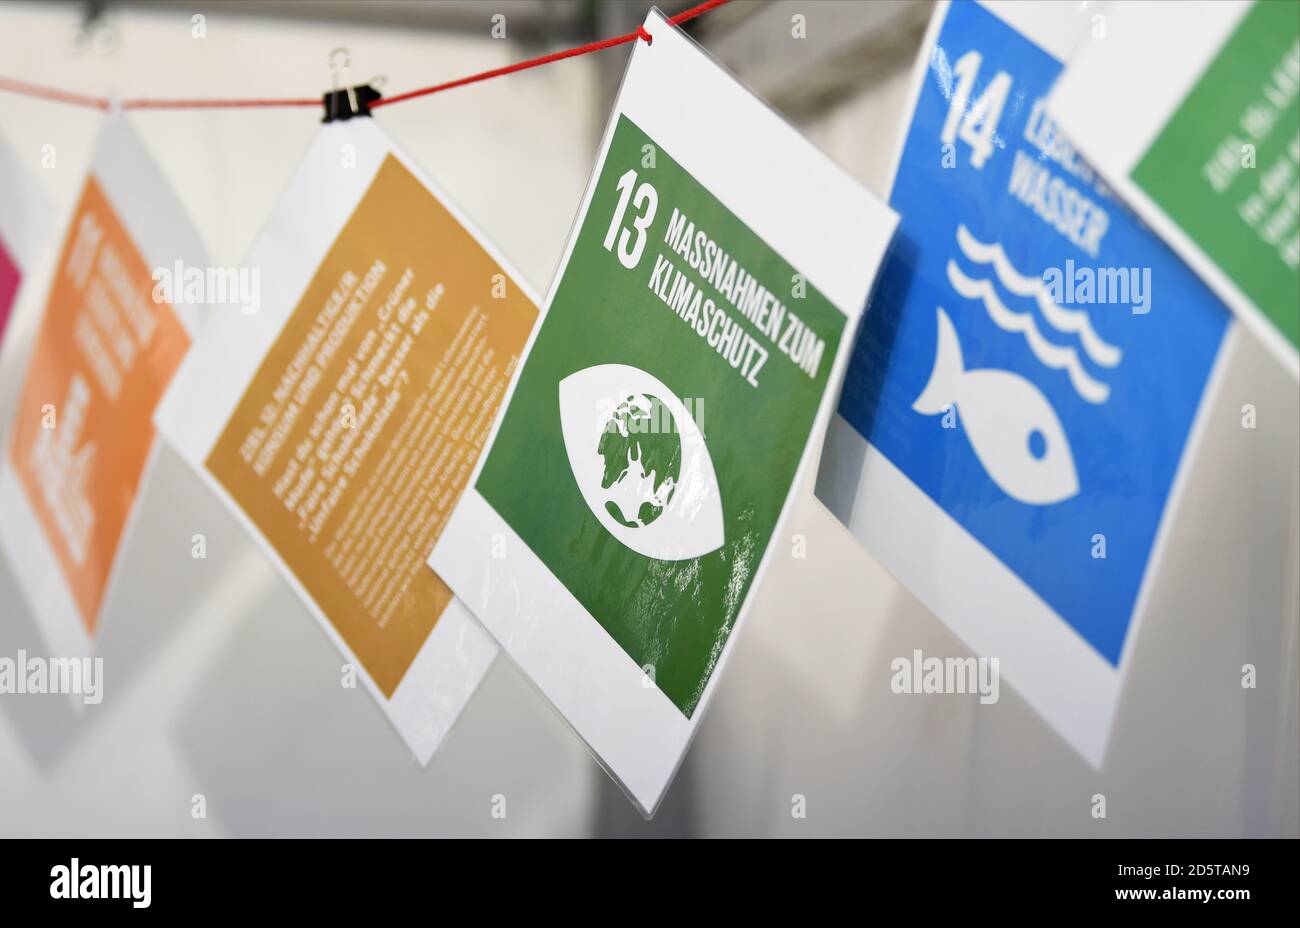 Berlin, Germany. 14th Oct, 2020. Signs such as 'Measures for climate protection' with goals for sustainable development are hung up at the Citizen Science Festival 'Mitforschen!' in the Berlin Kulturbrauerei as part of 'Bürger schaffen Wissen'. The event will take place on 14 and 15 October 2020. The festival is about sustainable development. The festival offers projects the opportunity to introduce themselves and invite people to participate in research. Credit: Kira Hofmann/dpa-Zentralbild/ZB/dpa/Alamy Live News Stock Photo